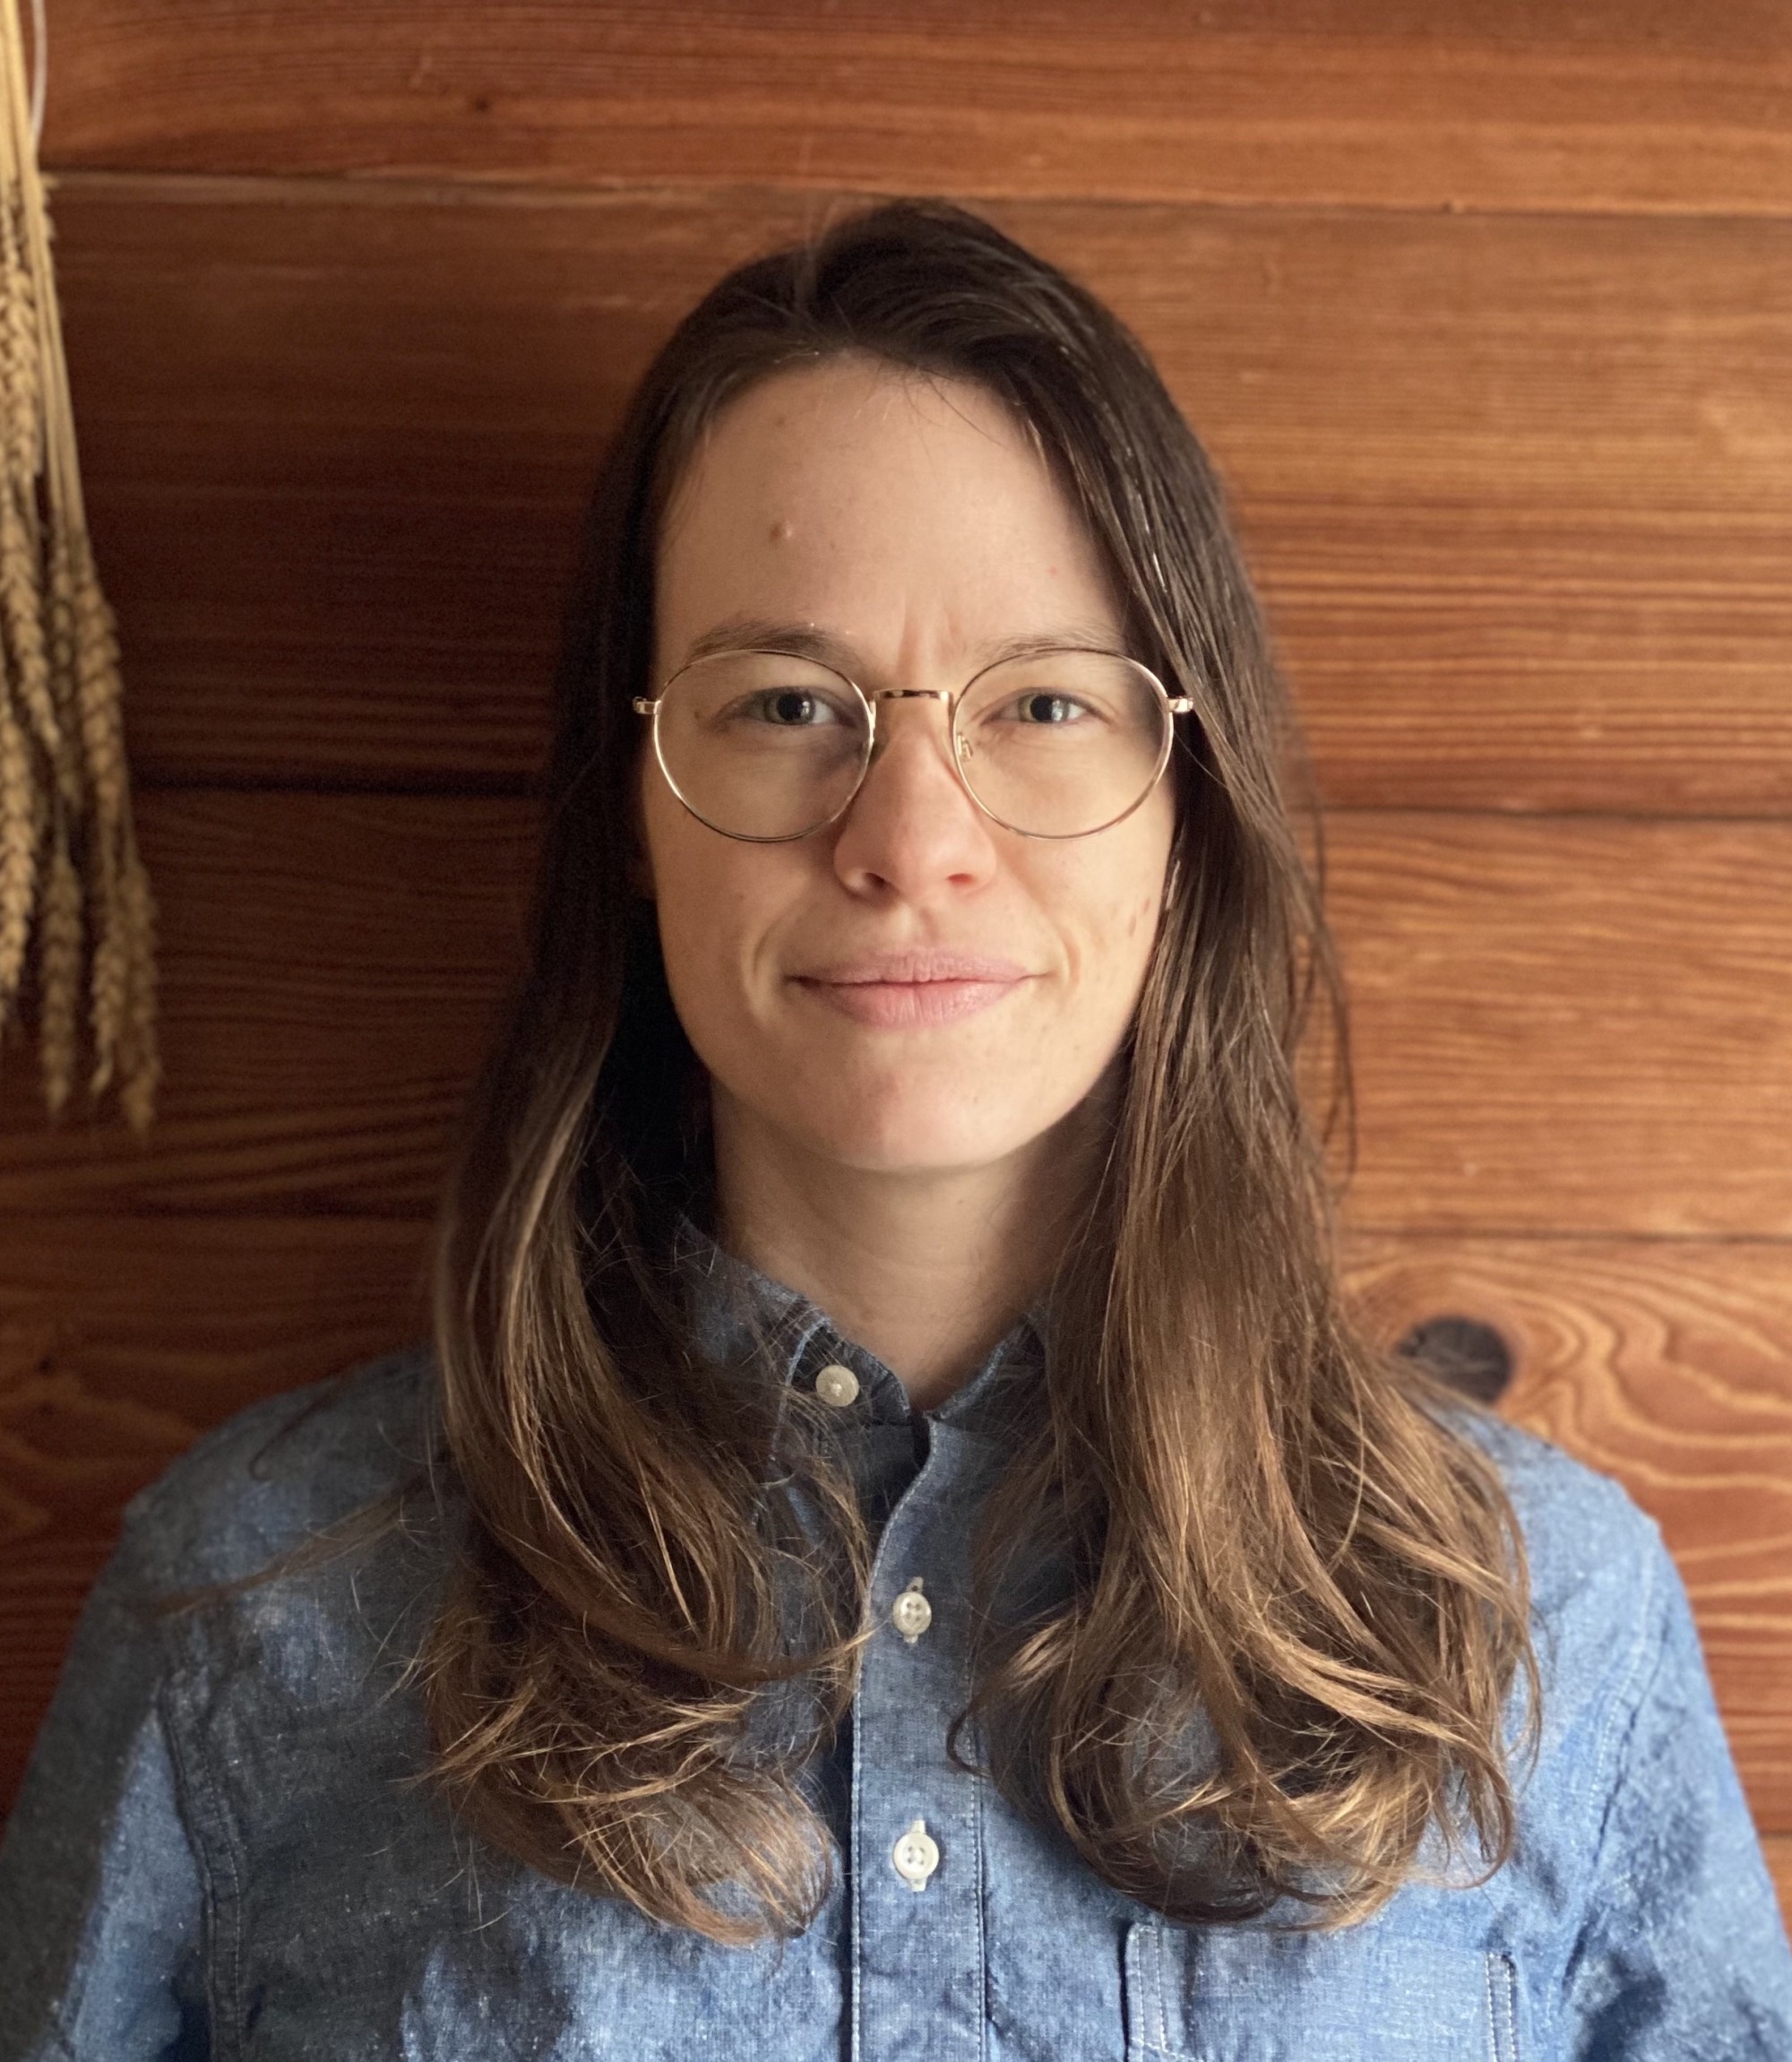 Alicia Mountain: a white cis woman with brown hair to below the shoulders, wear eyeglasses and a blue collared shirt. She looks into the camera directly with a slight smile. She stands indoors in front of a brown wood-paneled wall.